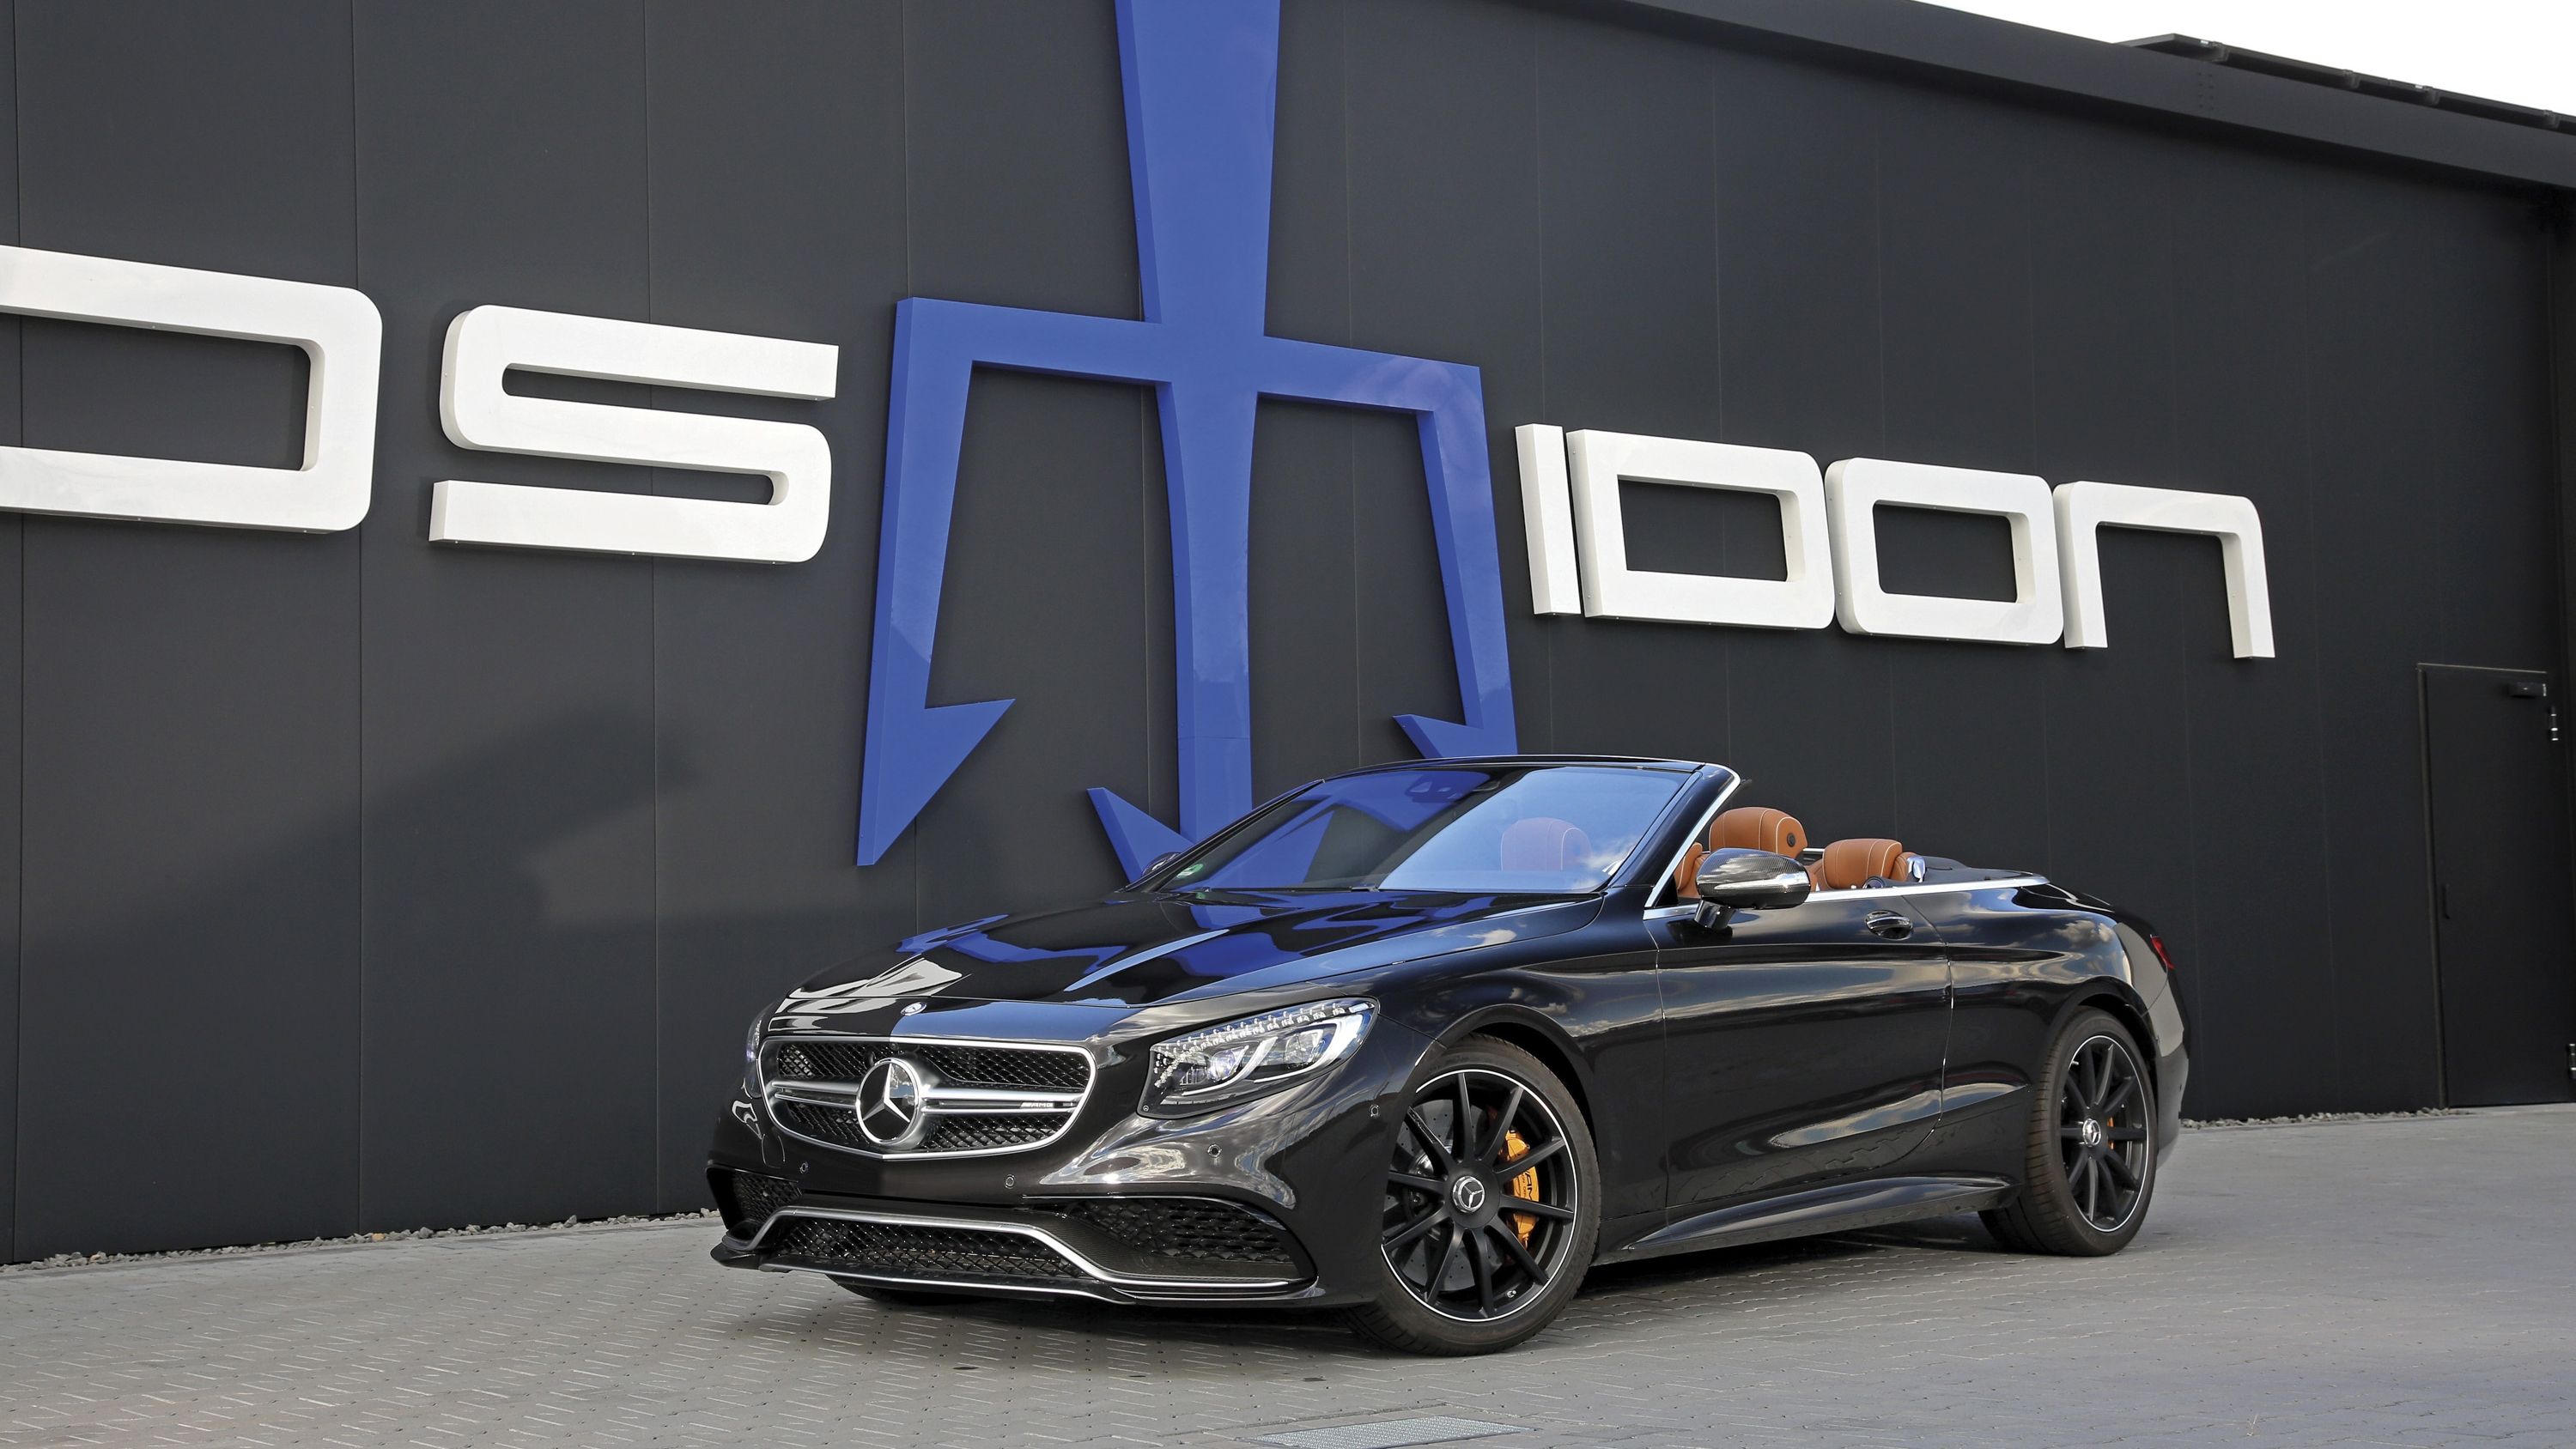 2018 Mercedes-AMG S 63 Cabrio by Posaidon